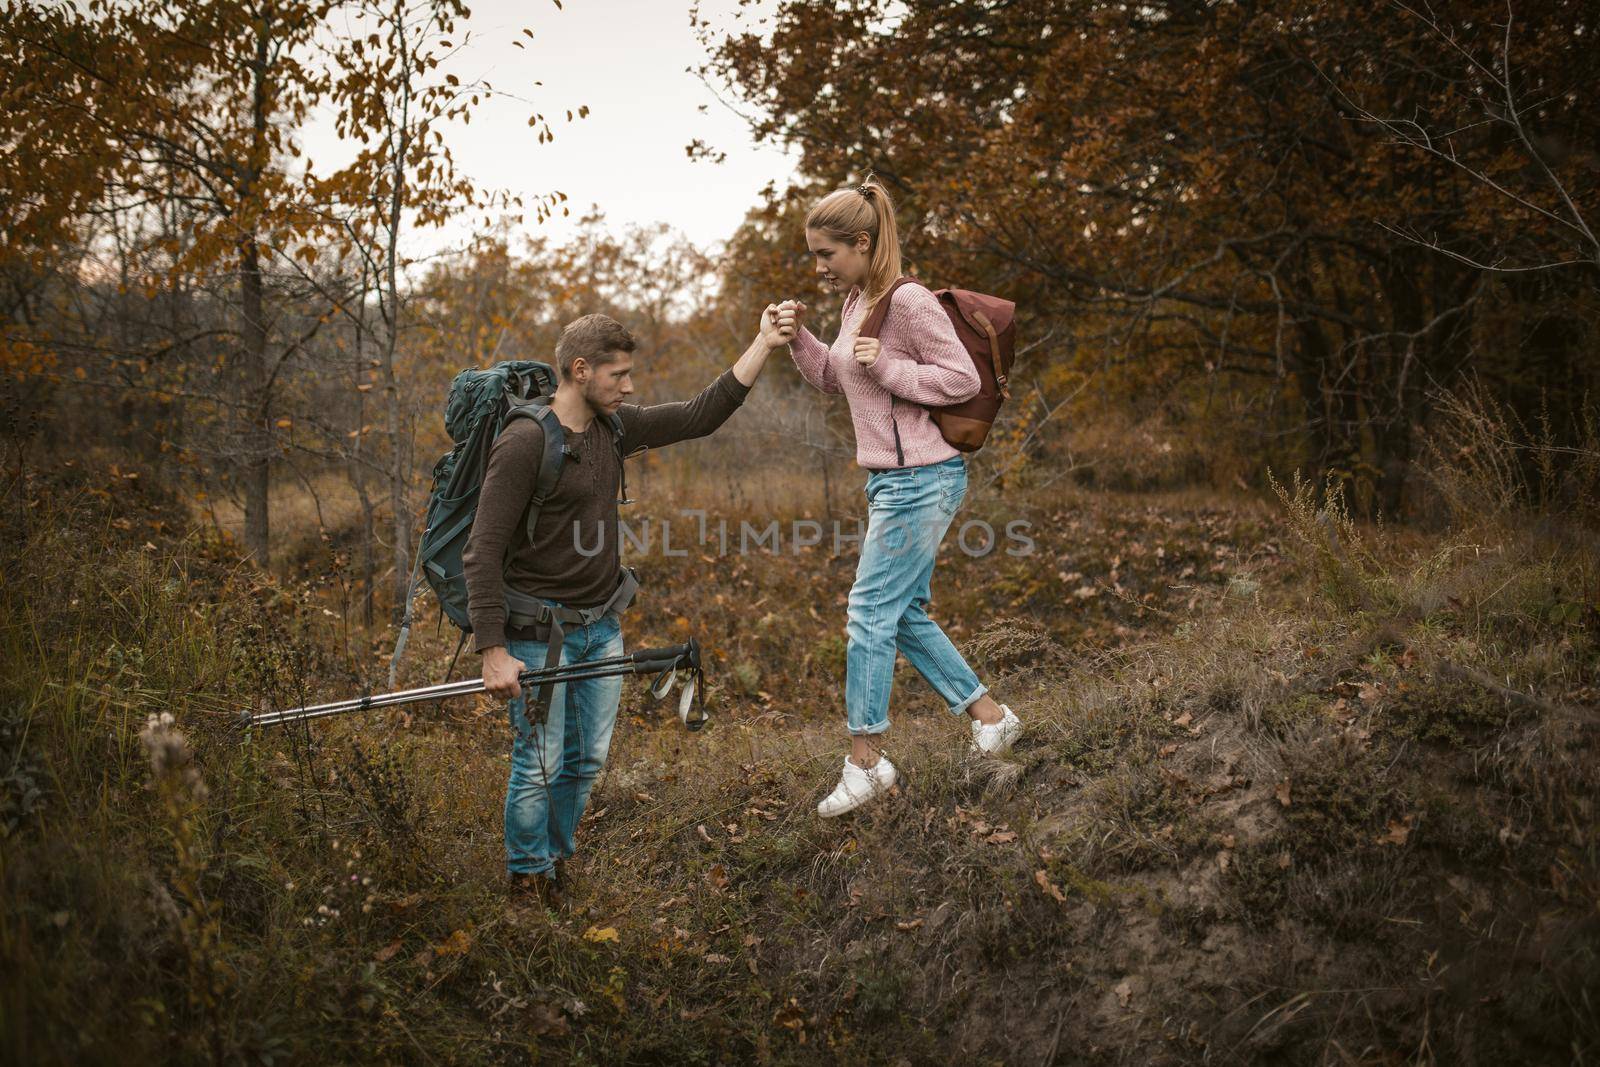 Hiking in nature. Young Man and Woman backpackers descend from the slope holding hands and holding hiking poles in their hands. Tourists with backpacks walk through the autumn forest. Support concept.